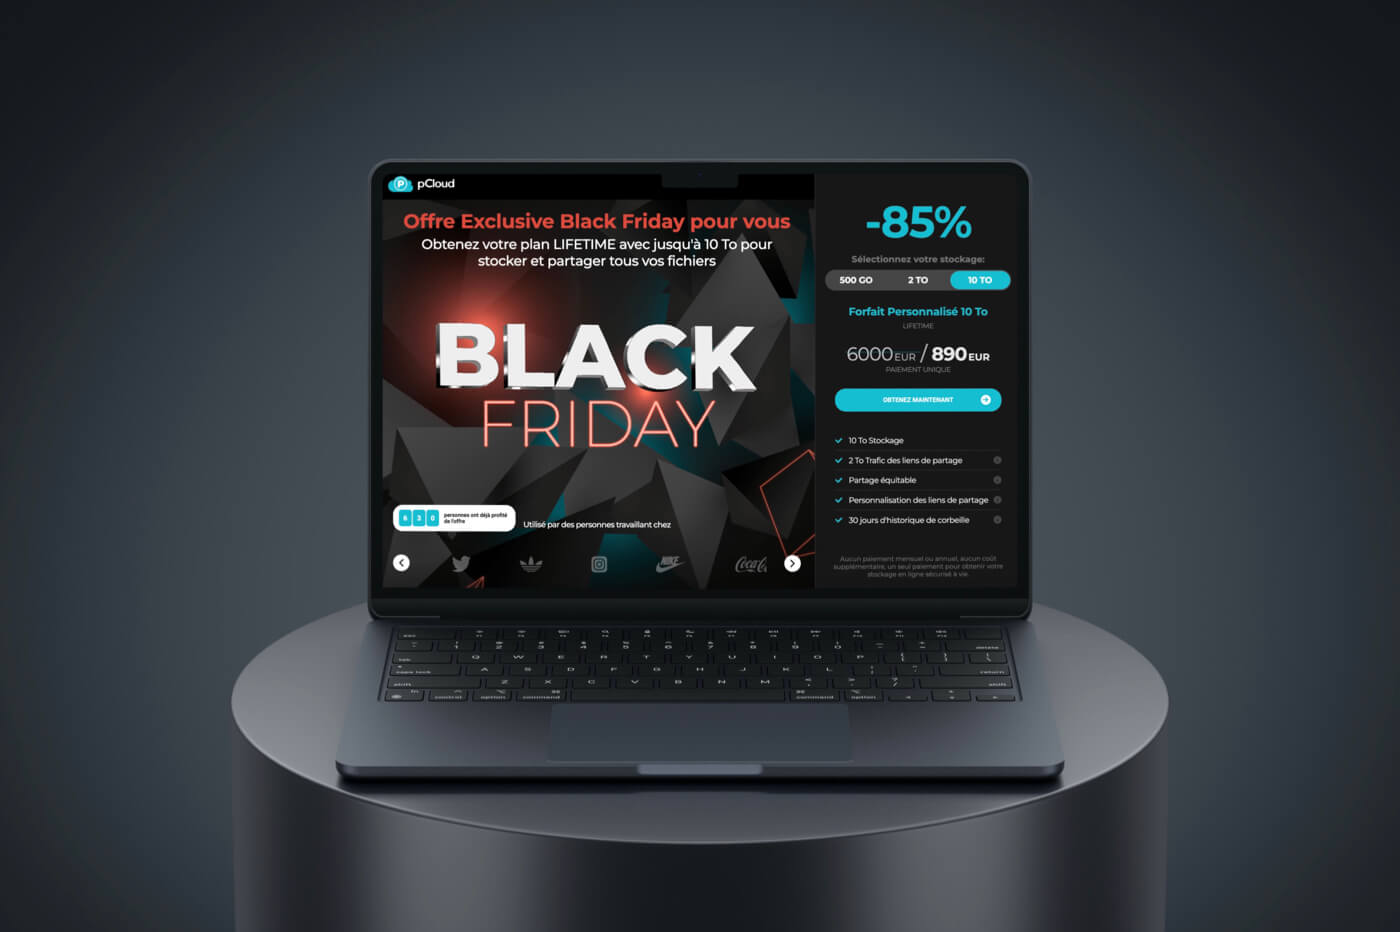 offre-pCloud-black-friday